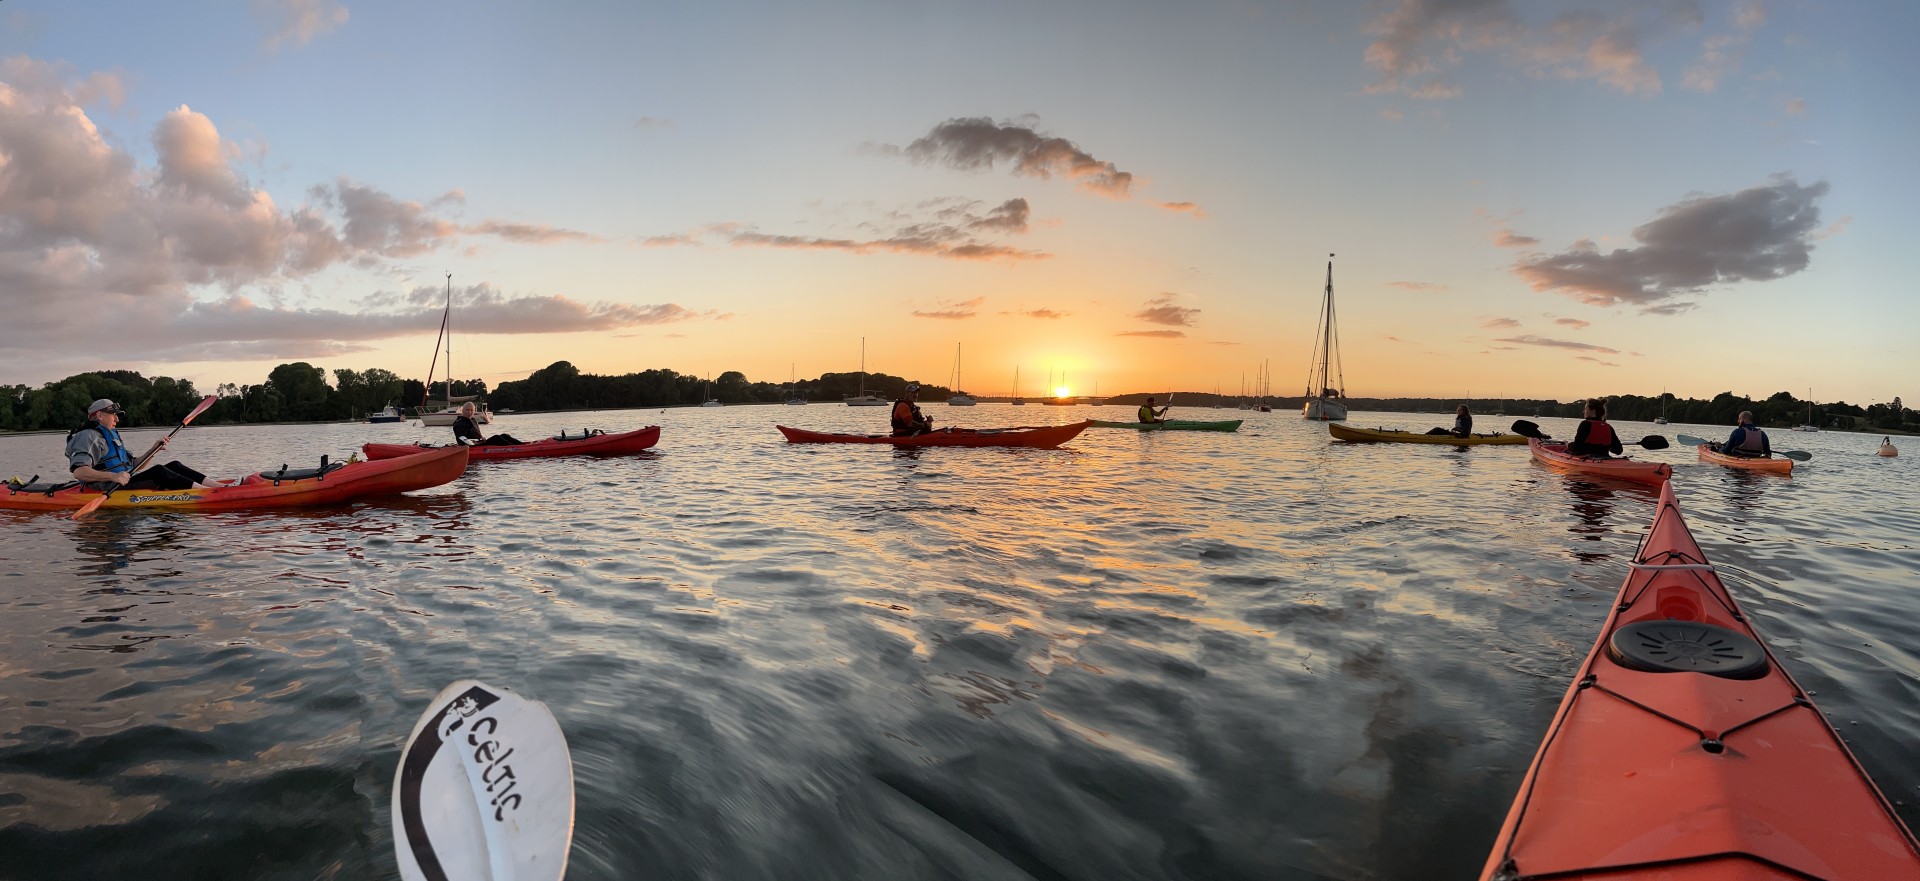 Sea kayakers at sunset on the Orwell estuary.